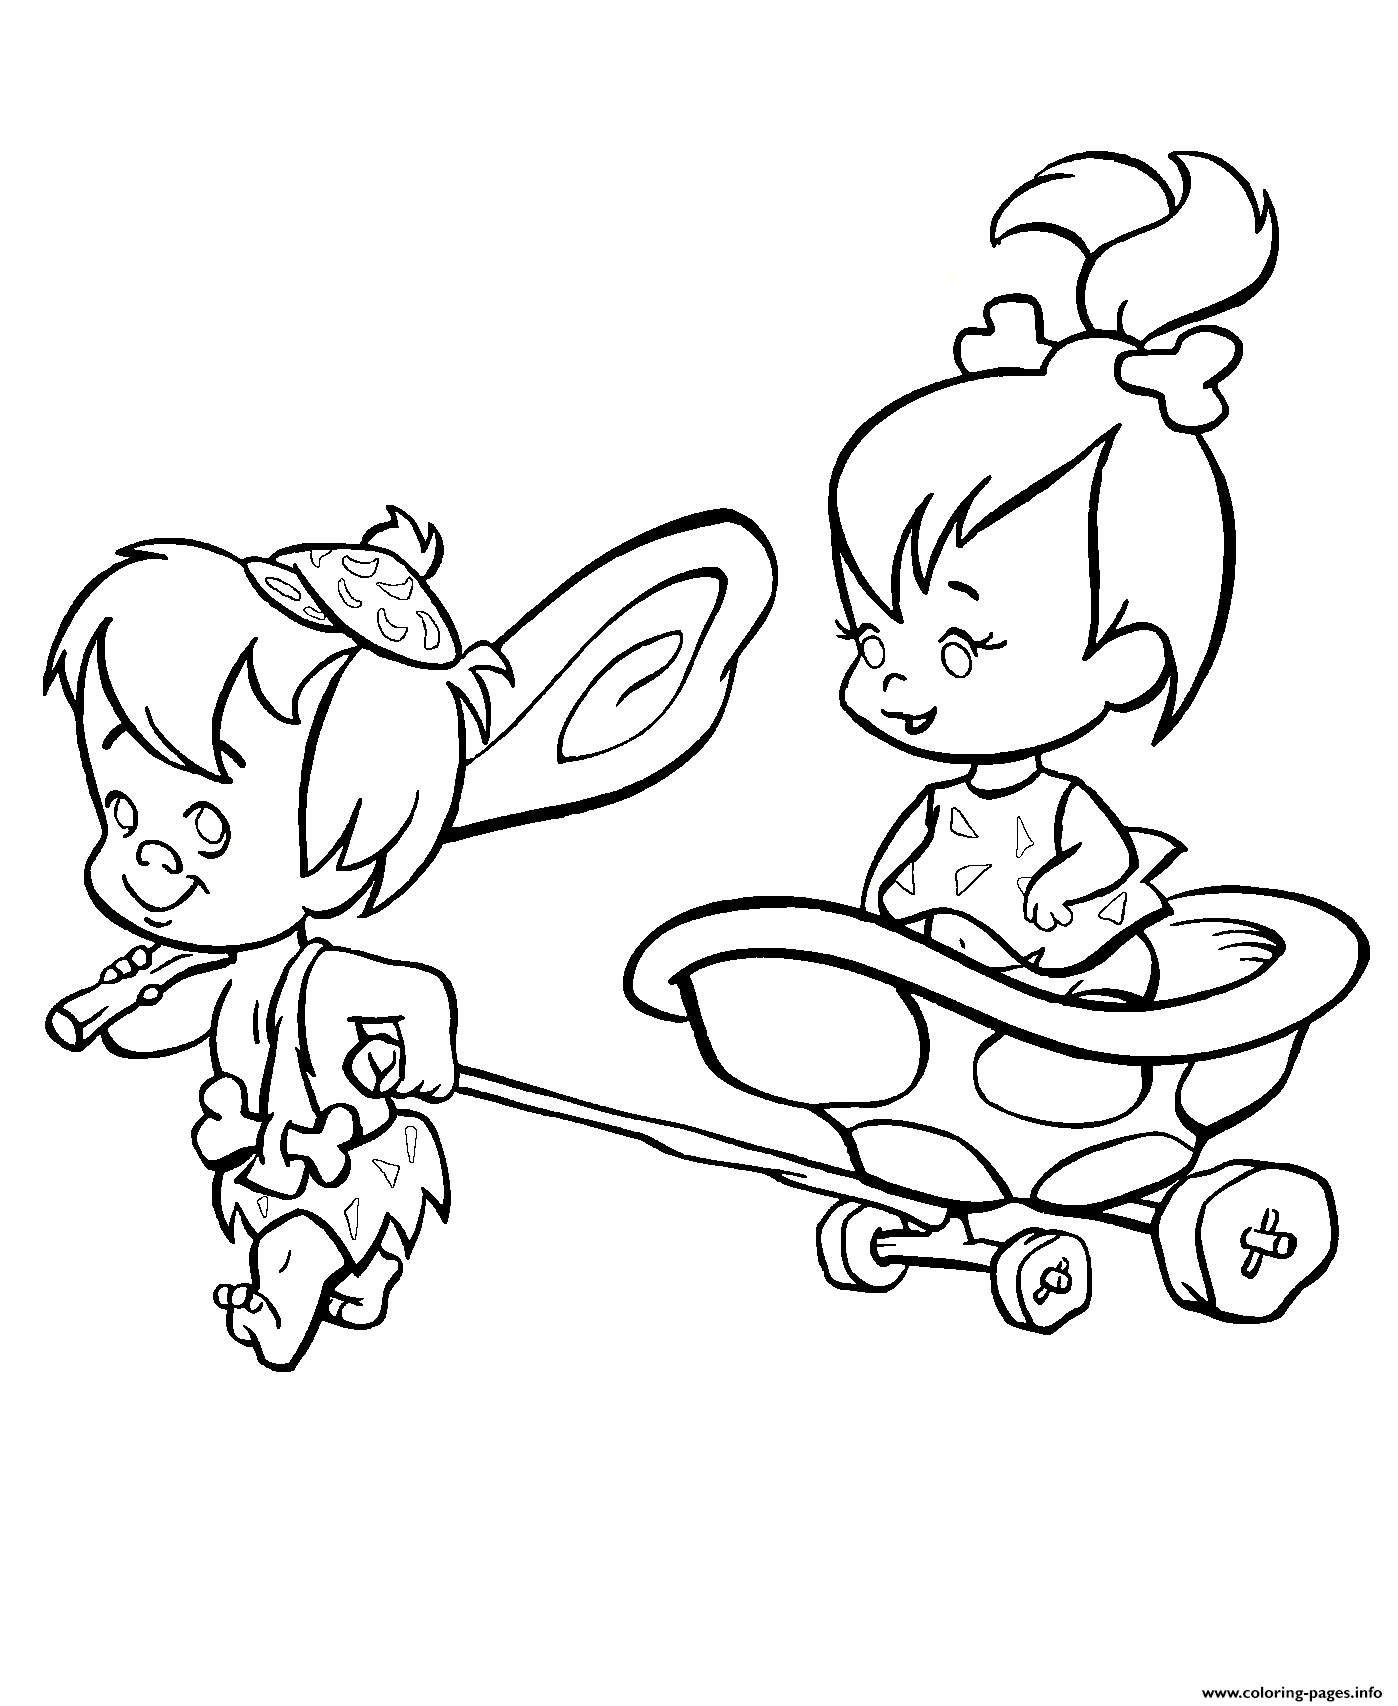 Pebbles And Bamm Bamm6242 coloring